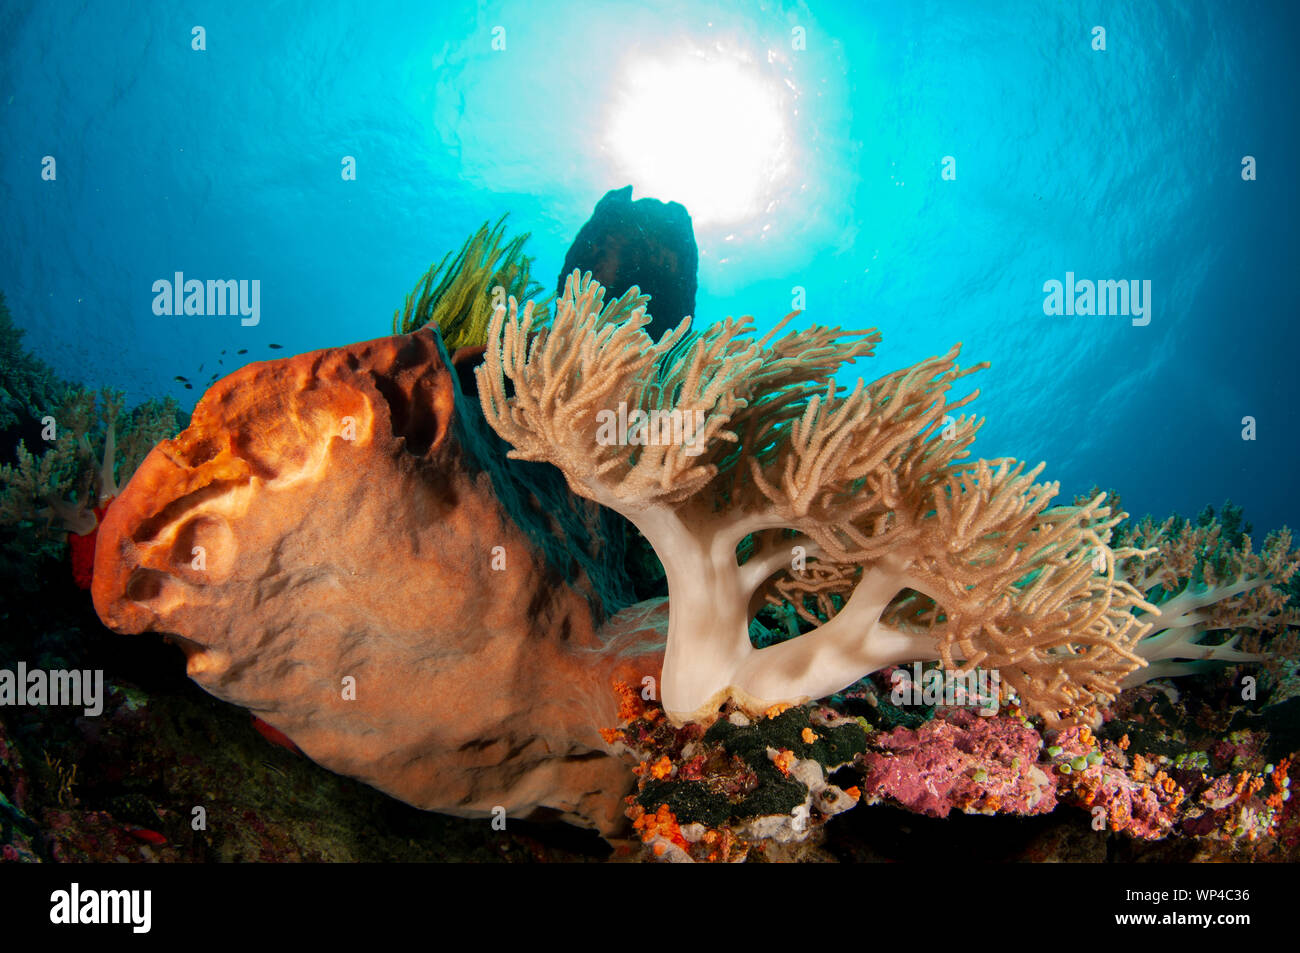 Leather Coral, Sinularia sp, on sponges with sun in background, Pulau Ai dive site, Banda Islands, Maluku, Indonesia Stock Photo